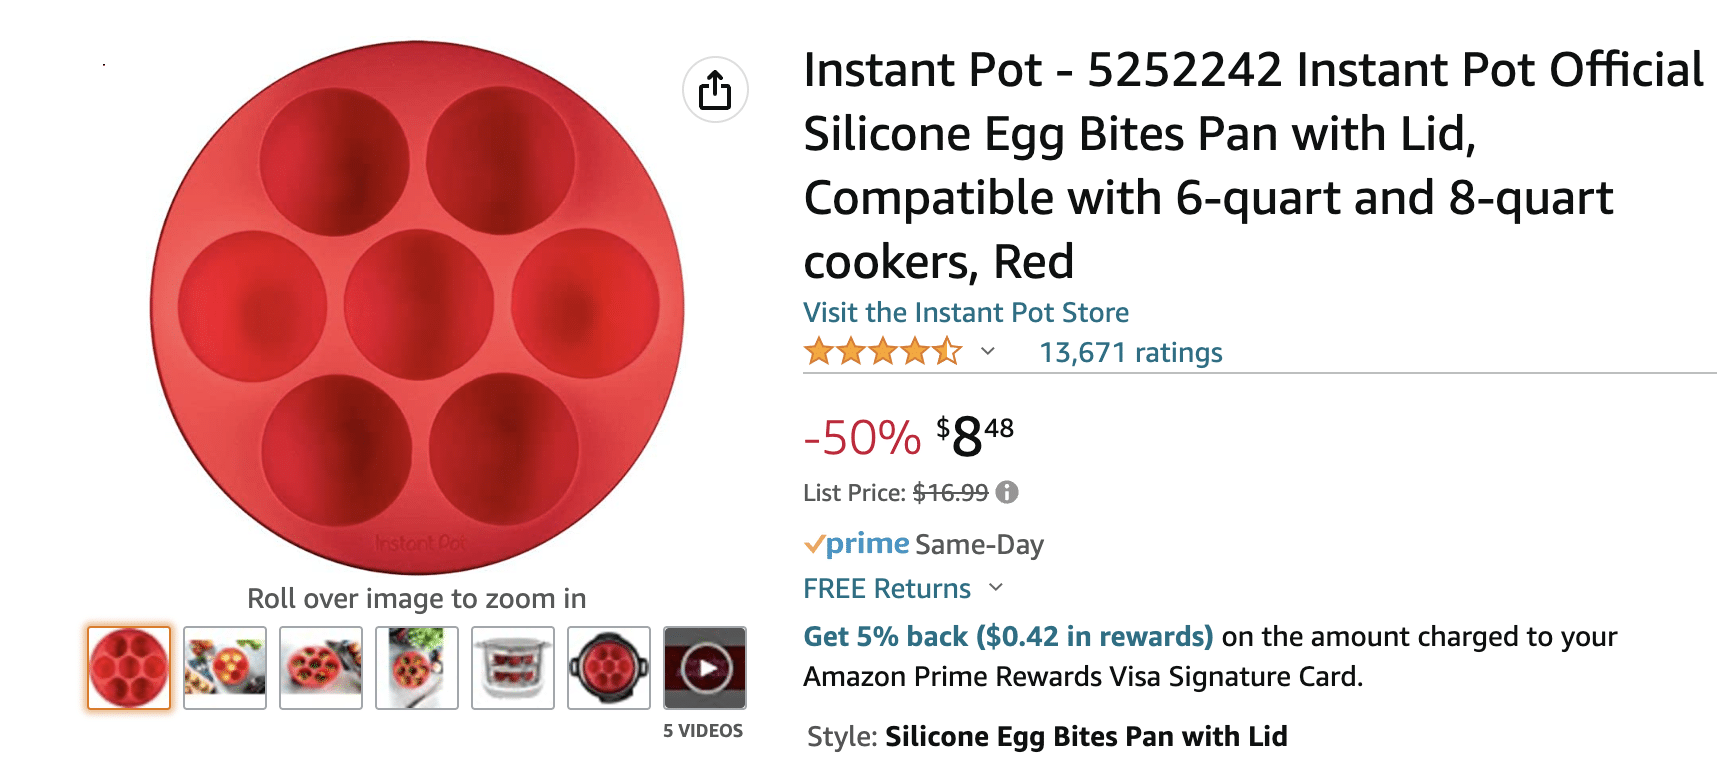 Instant Pot Official Silicone Egg Bites Pan With Lid, Compatible